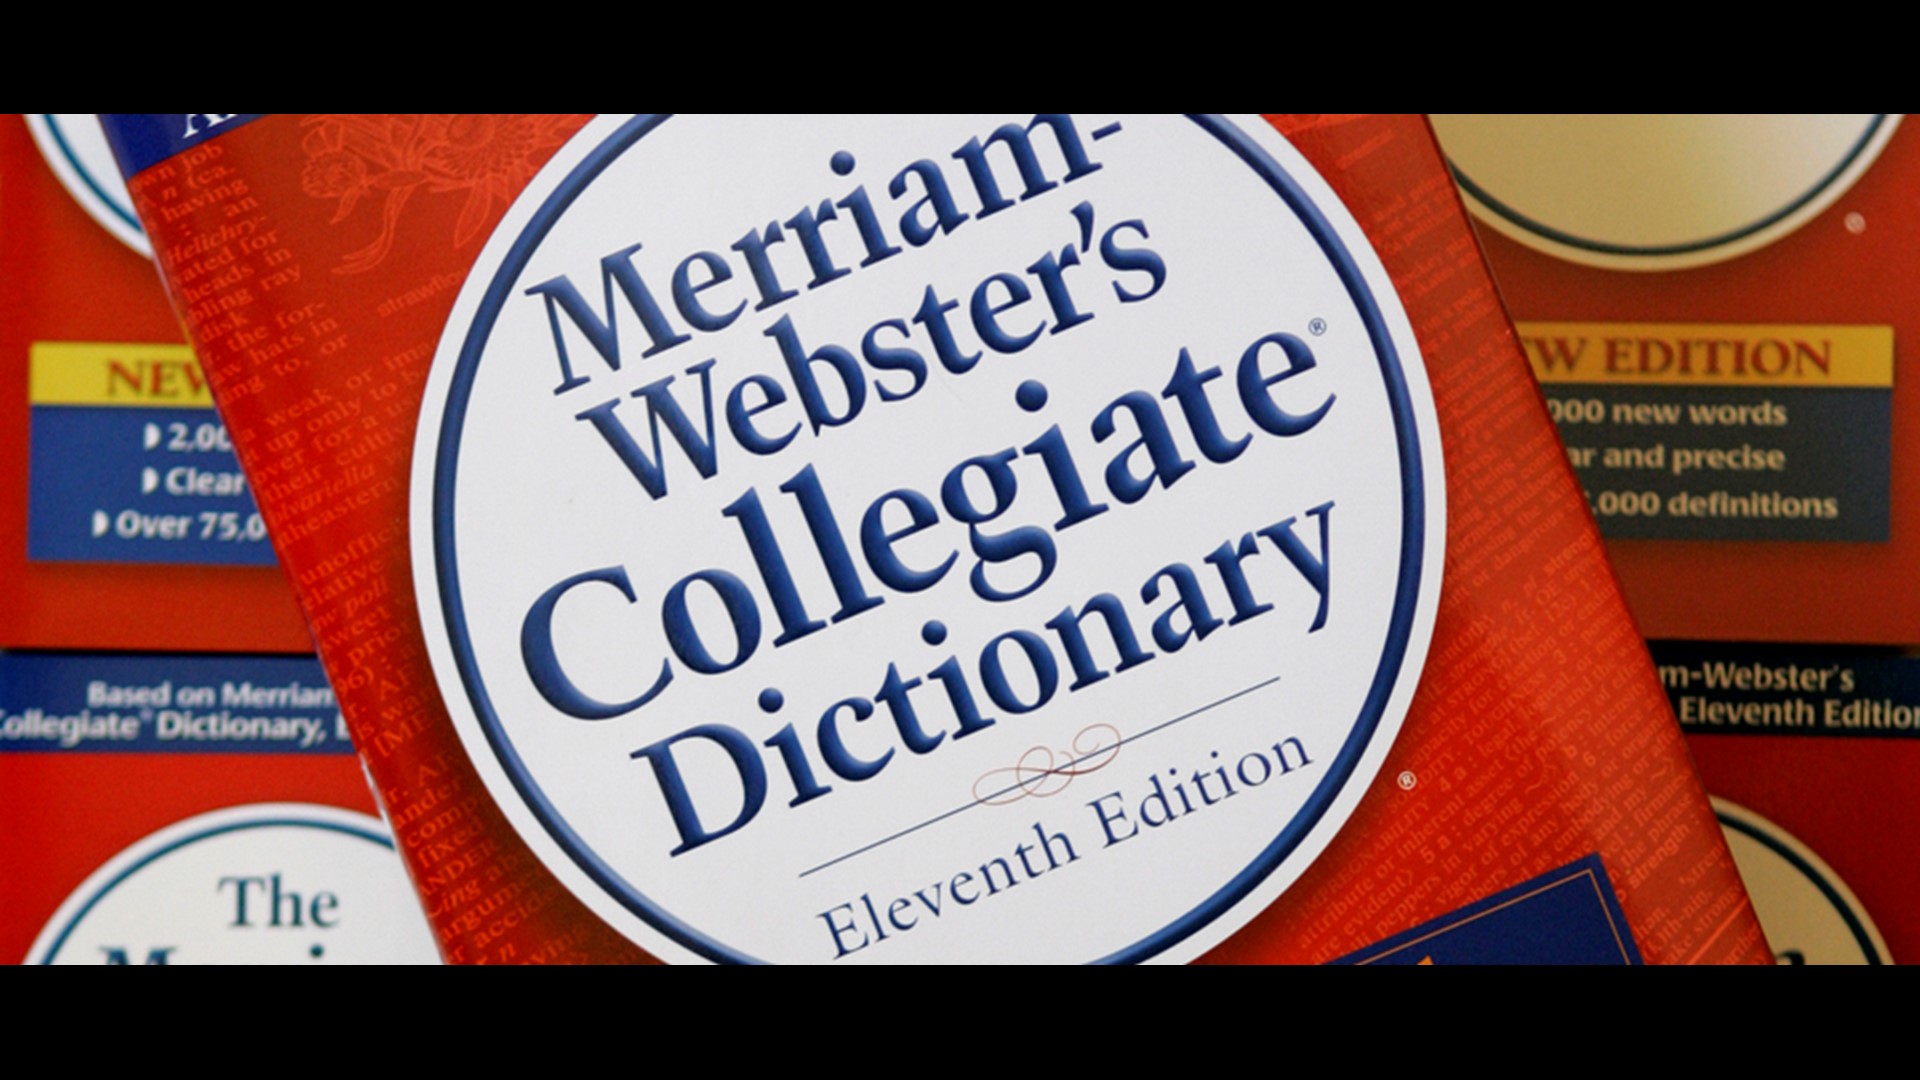 Hundreds of new words now added to the MerriamWebster dictionary